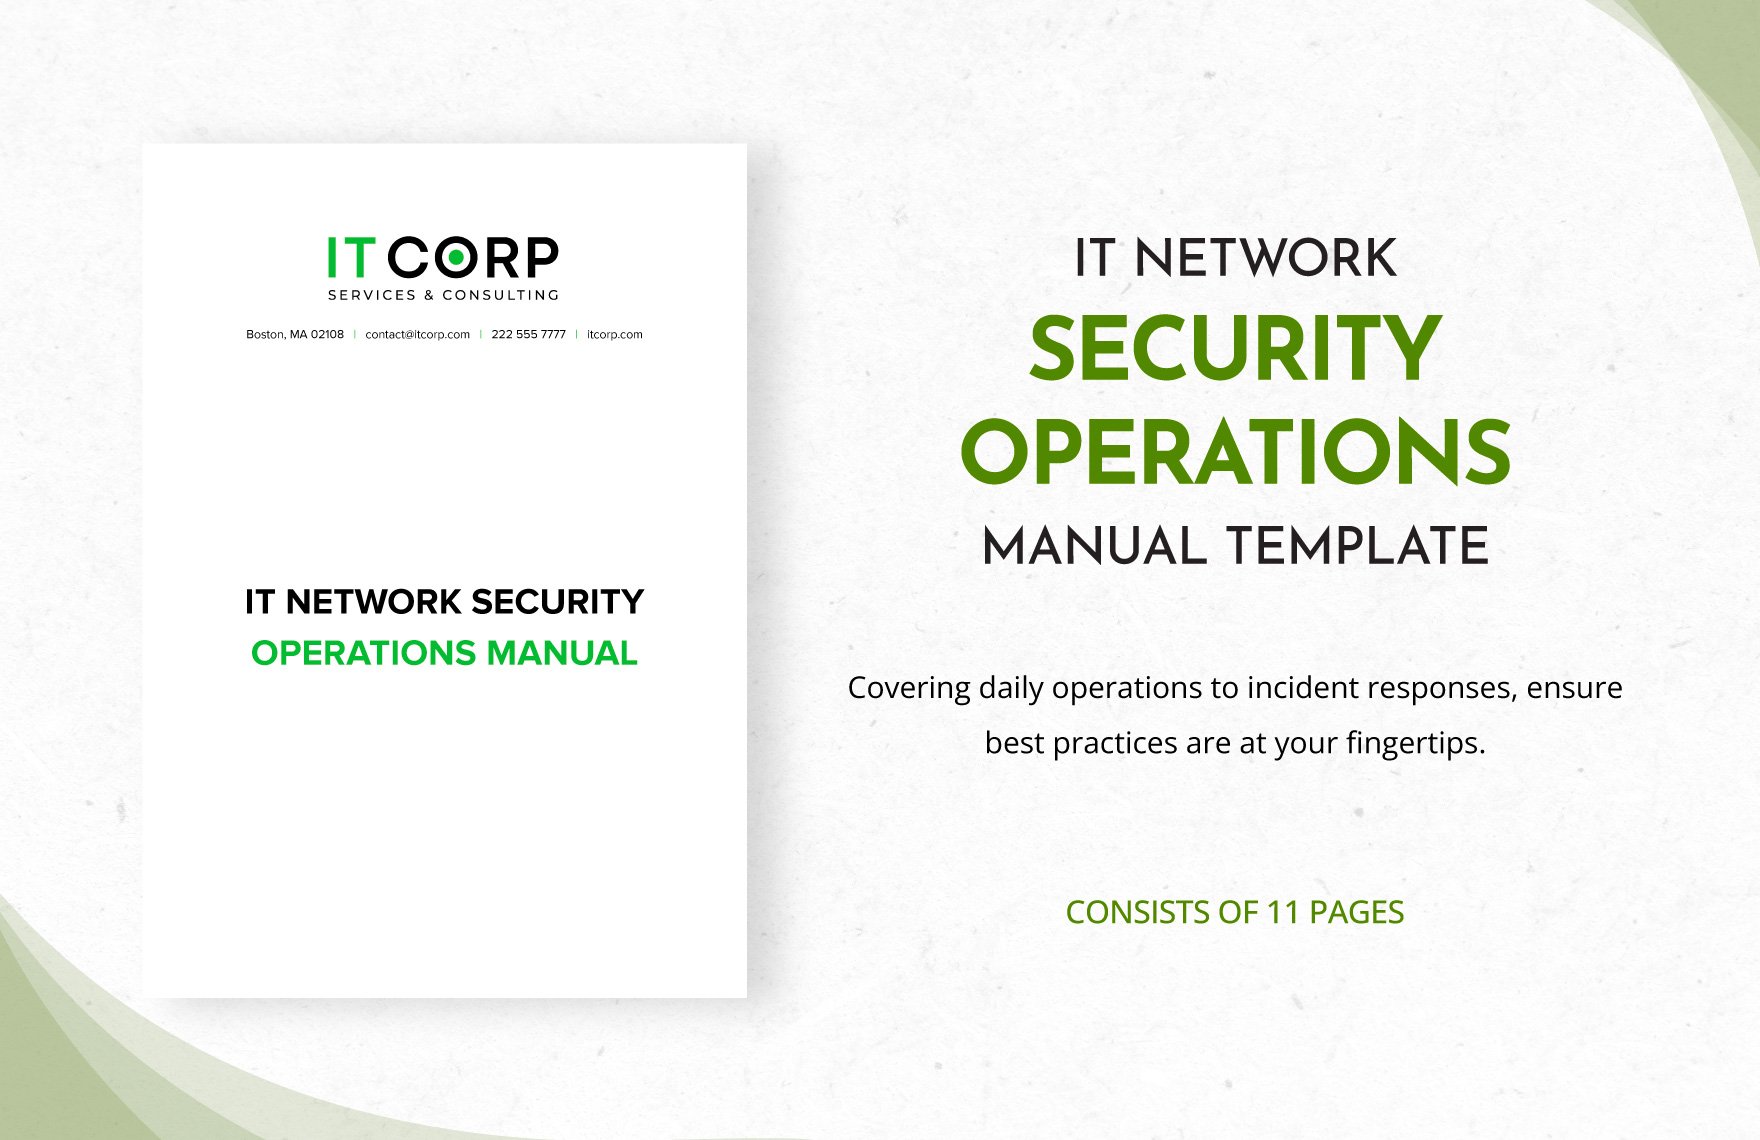 IT Network Security Operations Manual Template in Word, Google Docs, PDF